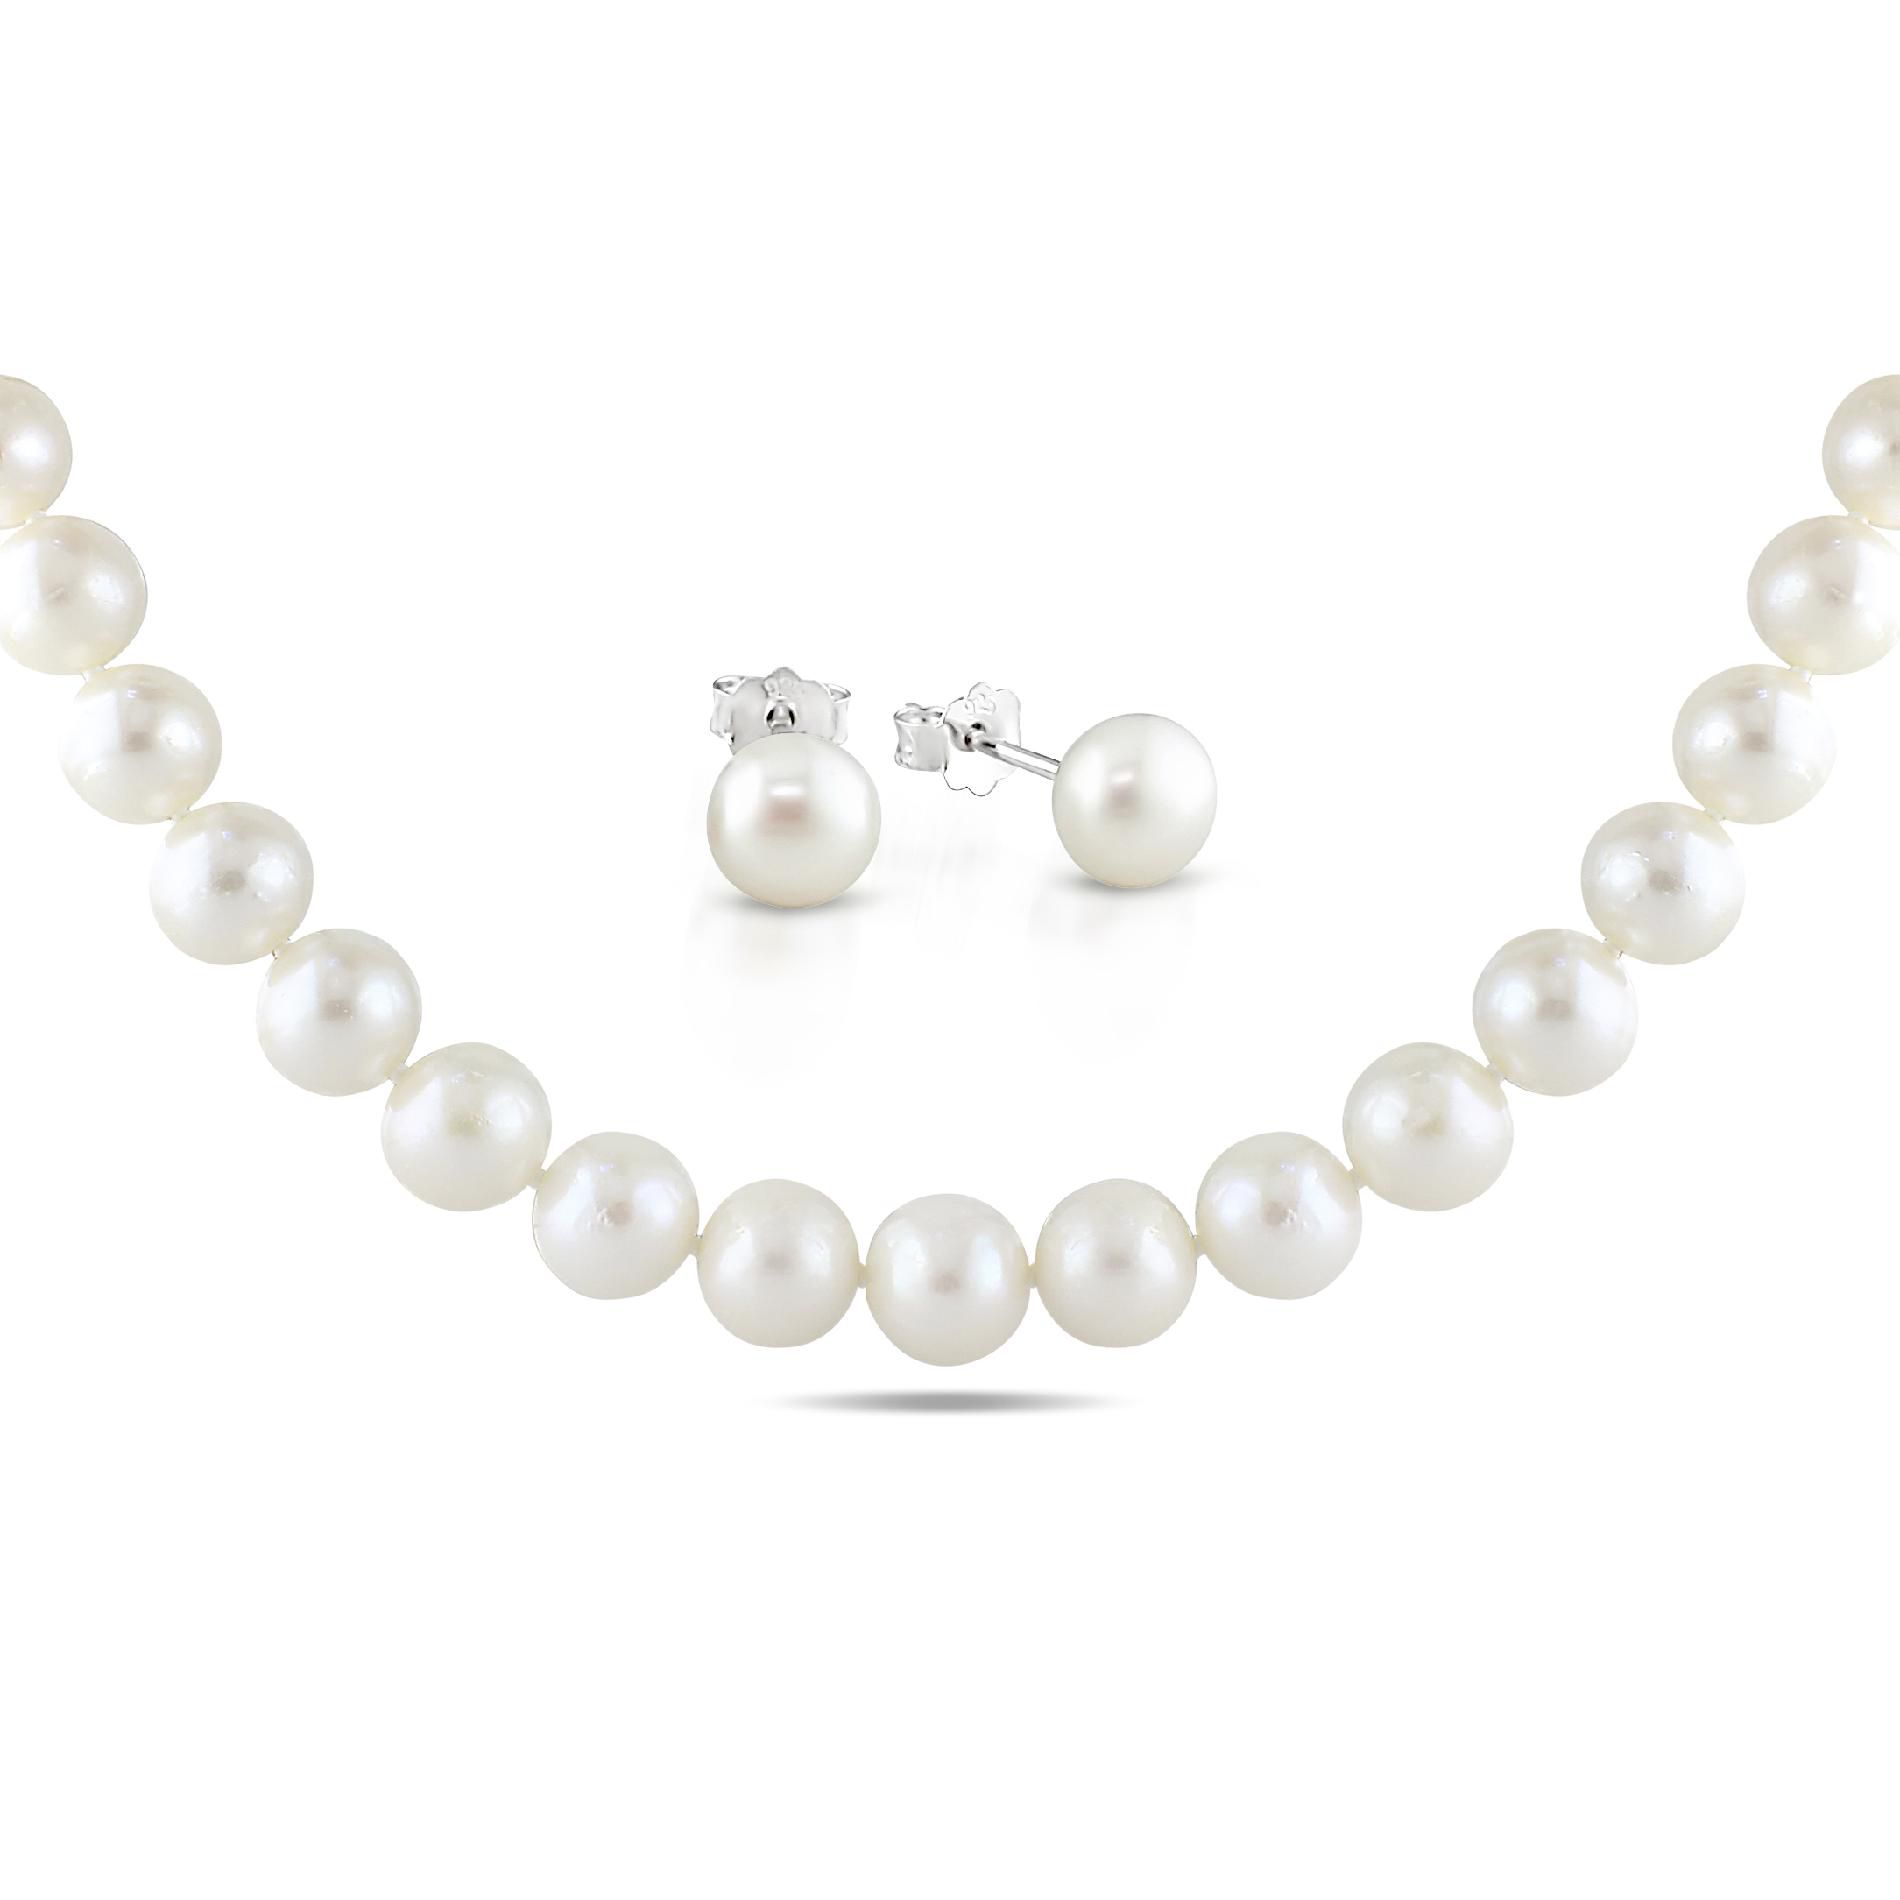 Sterling Silver Set of Freshwater White Pearl Necklace and Stud Earrings (10.5-11mm, 8-9mm)